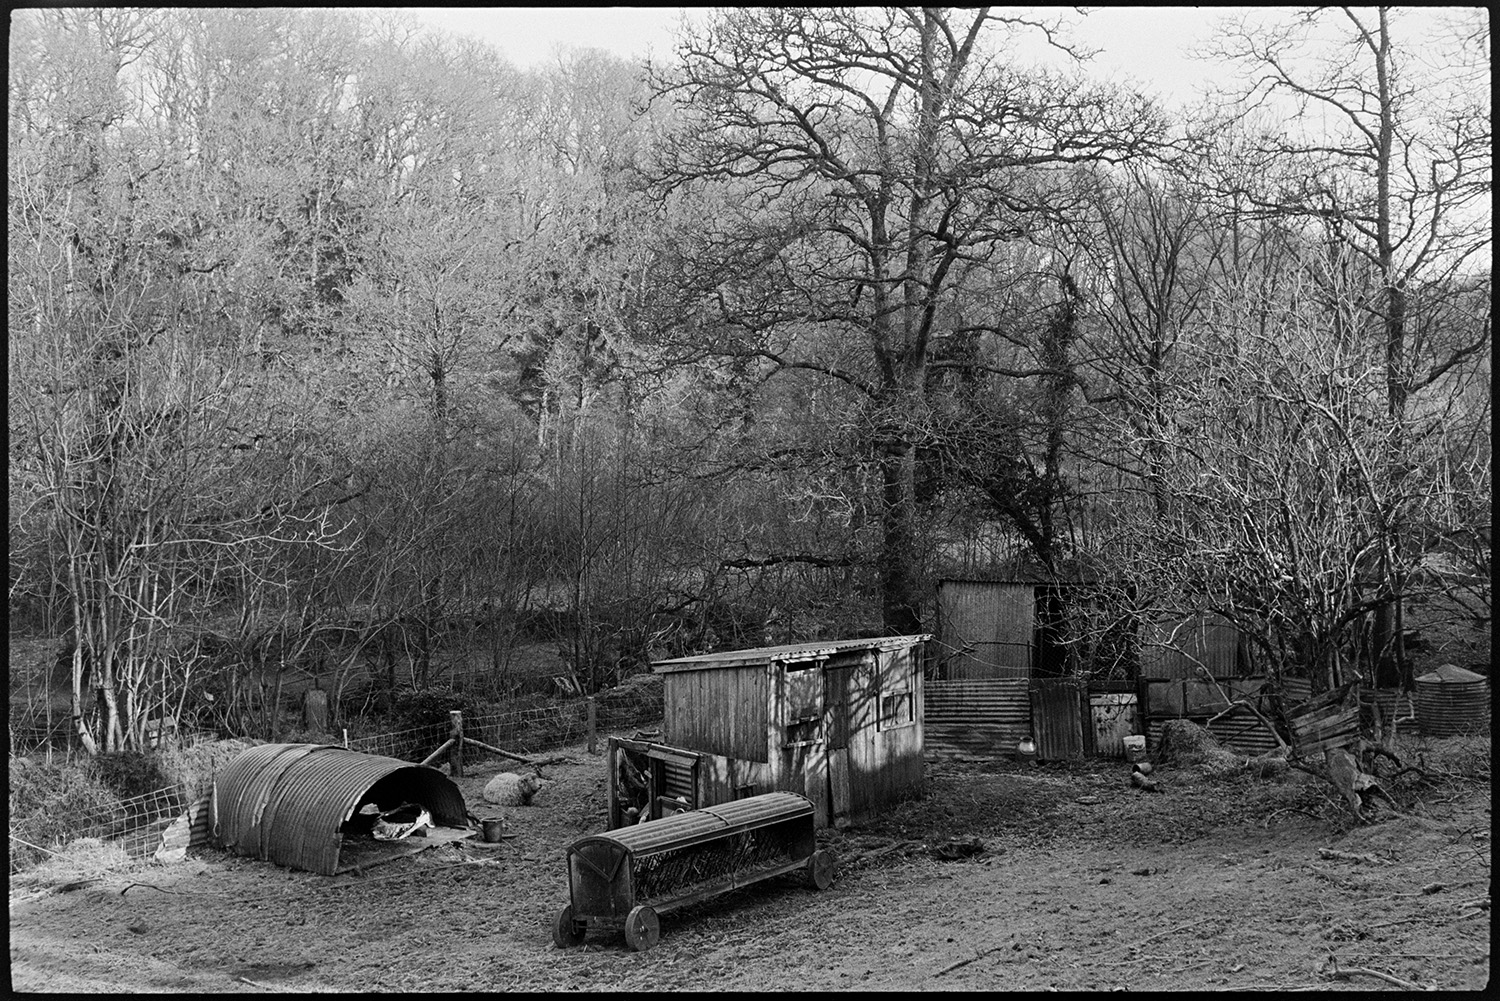 Smallholding with old car used for poultry and old shed. 
[Wooden sheds, corrugated iron sheds, a feeder and a sheep amongst trees in a smallholding at Millhams, Dolton.]